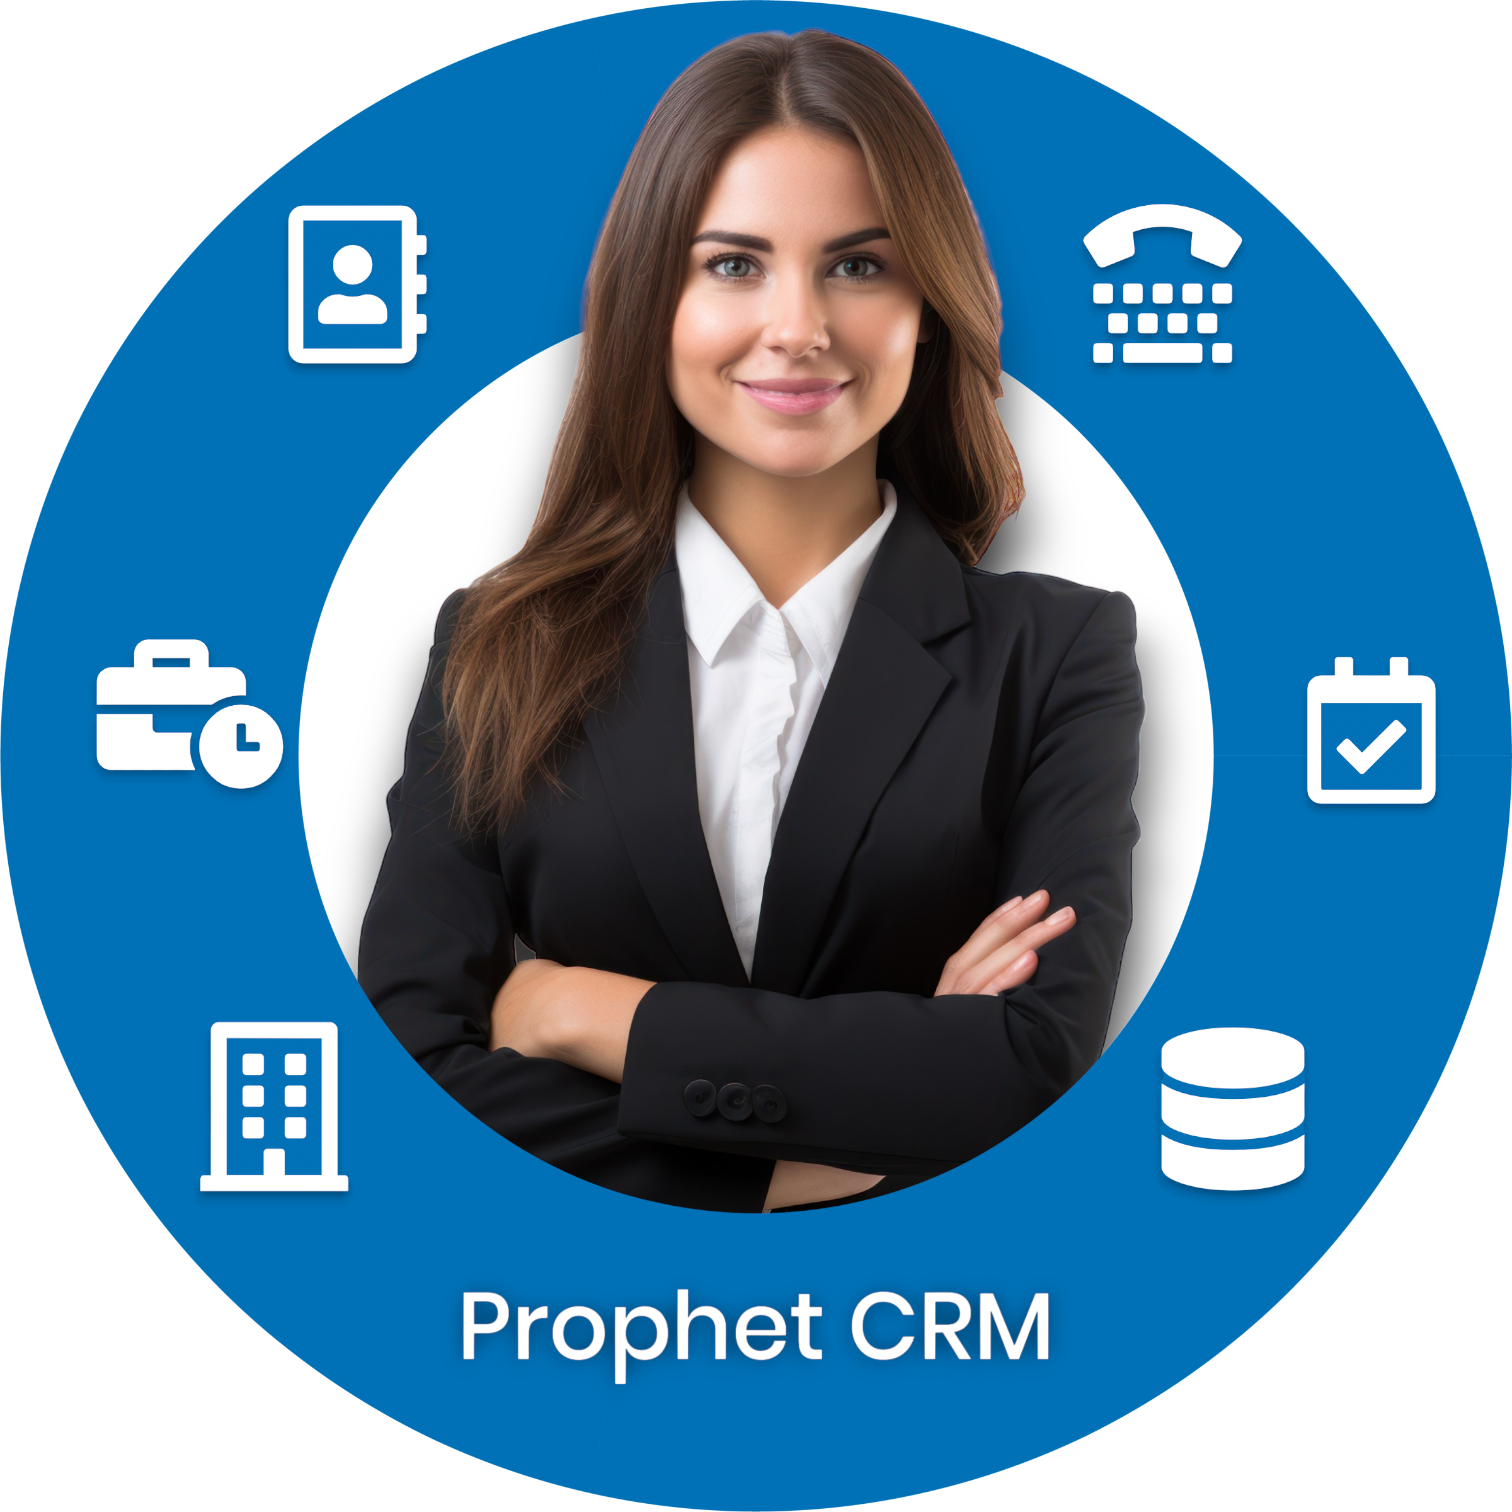 is outlook a crm - prophet crm is the outlook crm for you